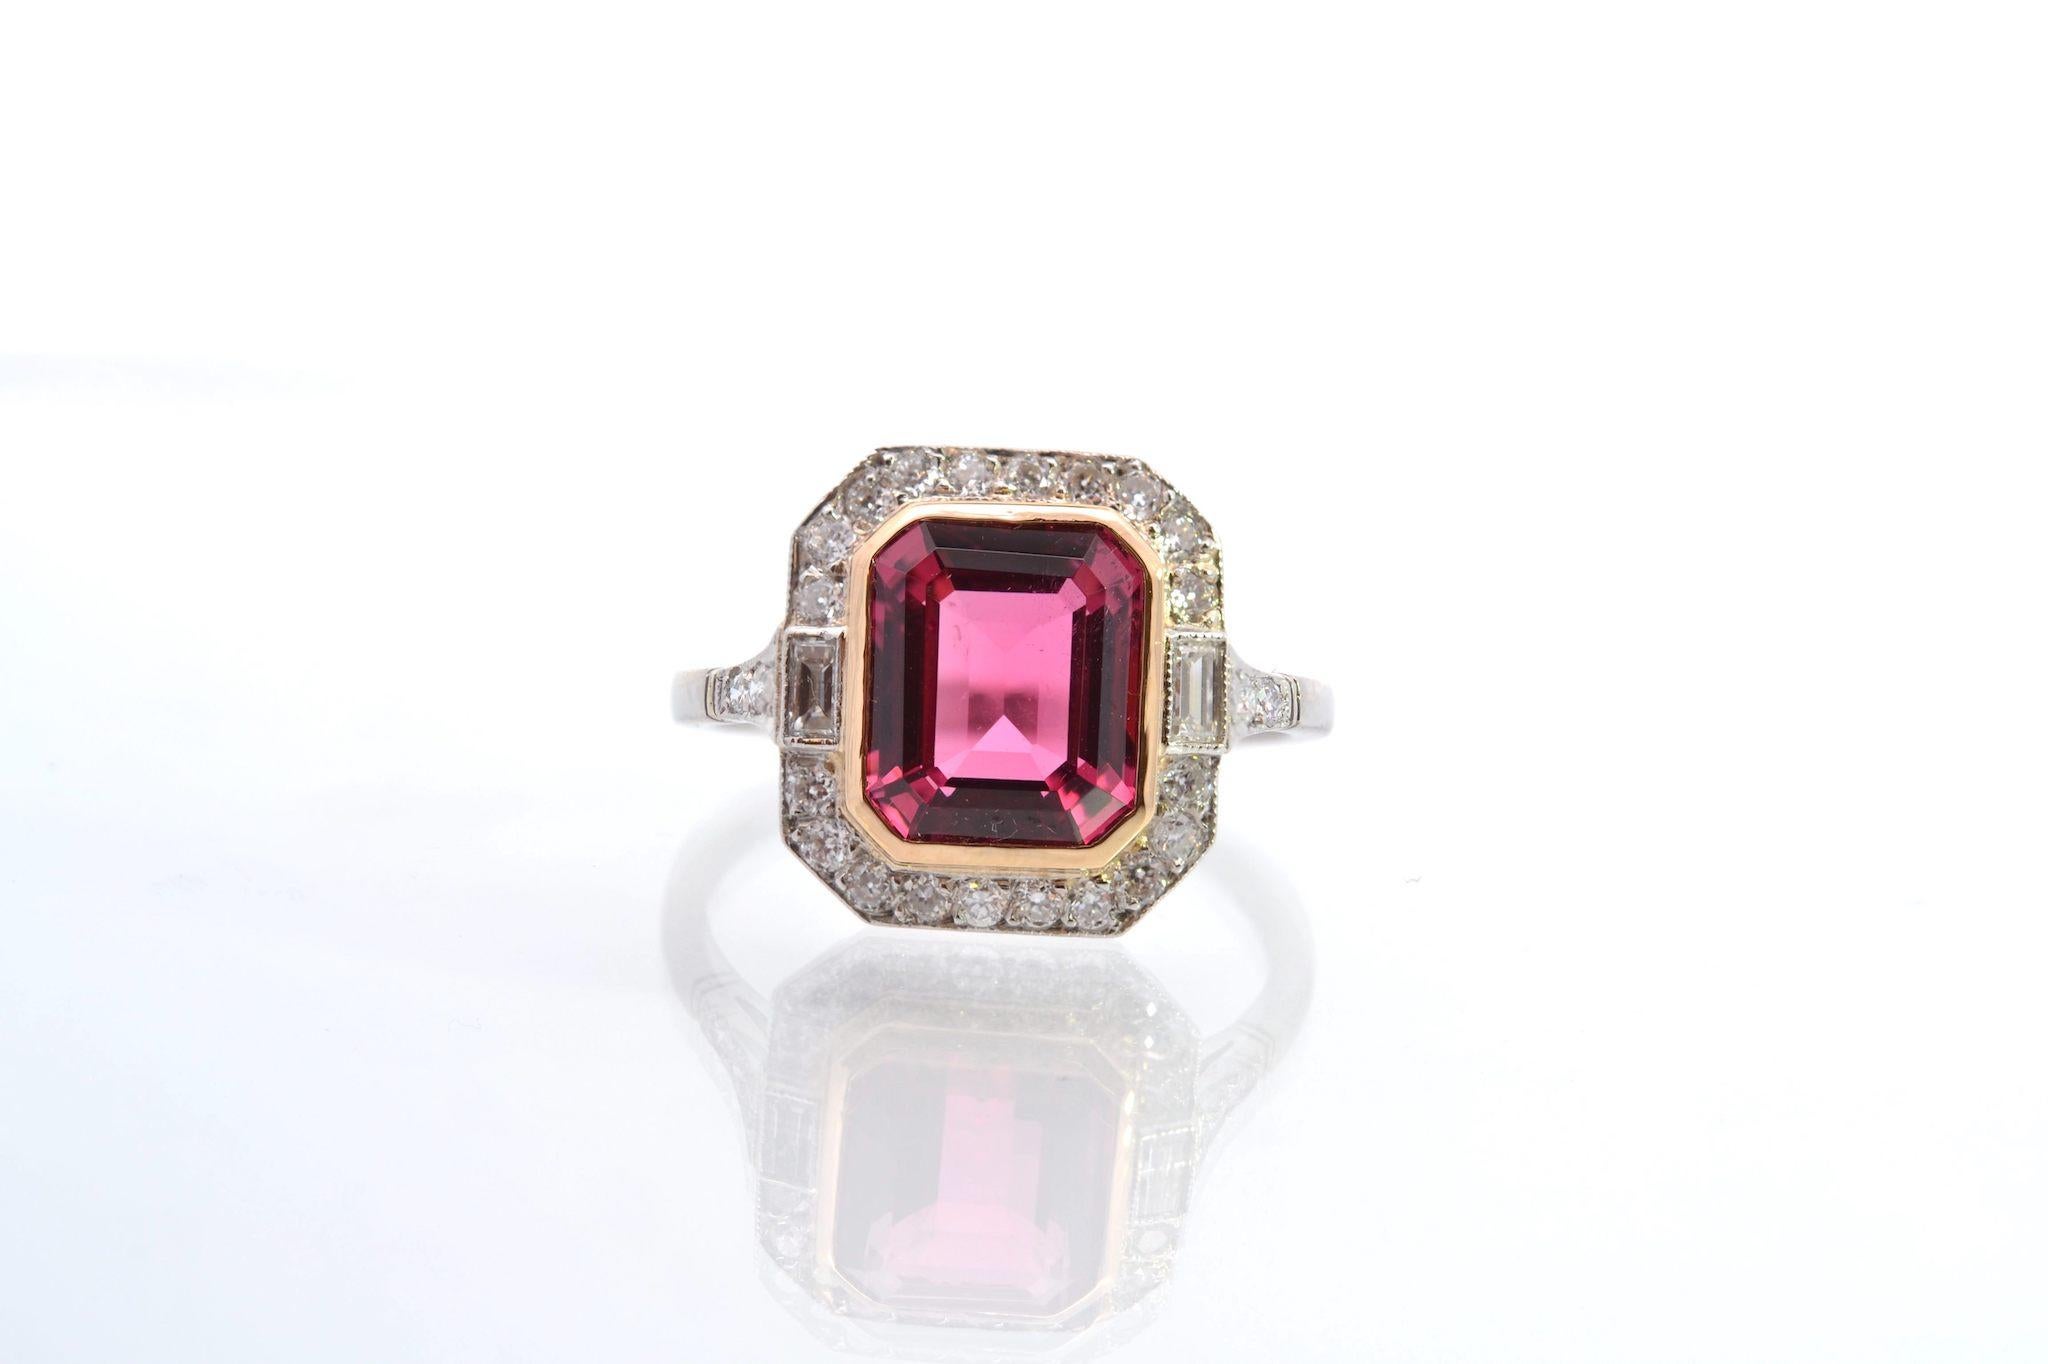 Stones: 1 pink tourmaline of 2.88cts, 26 diamonds: 0.40ct, 2 baguette diamonds: 0.10ct
Material: Platinum and yellow gold setting for the tourmaline
Dimensions: 1.3cm x 1.2cm
Weight: 4.7g
Period: Recent vintage style (handmade)
Size: 53 (free